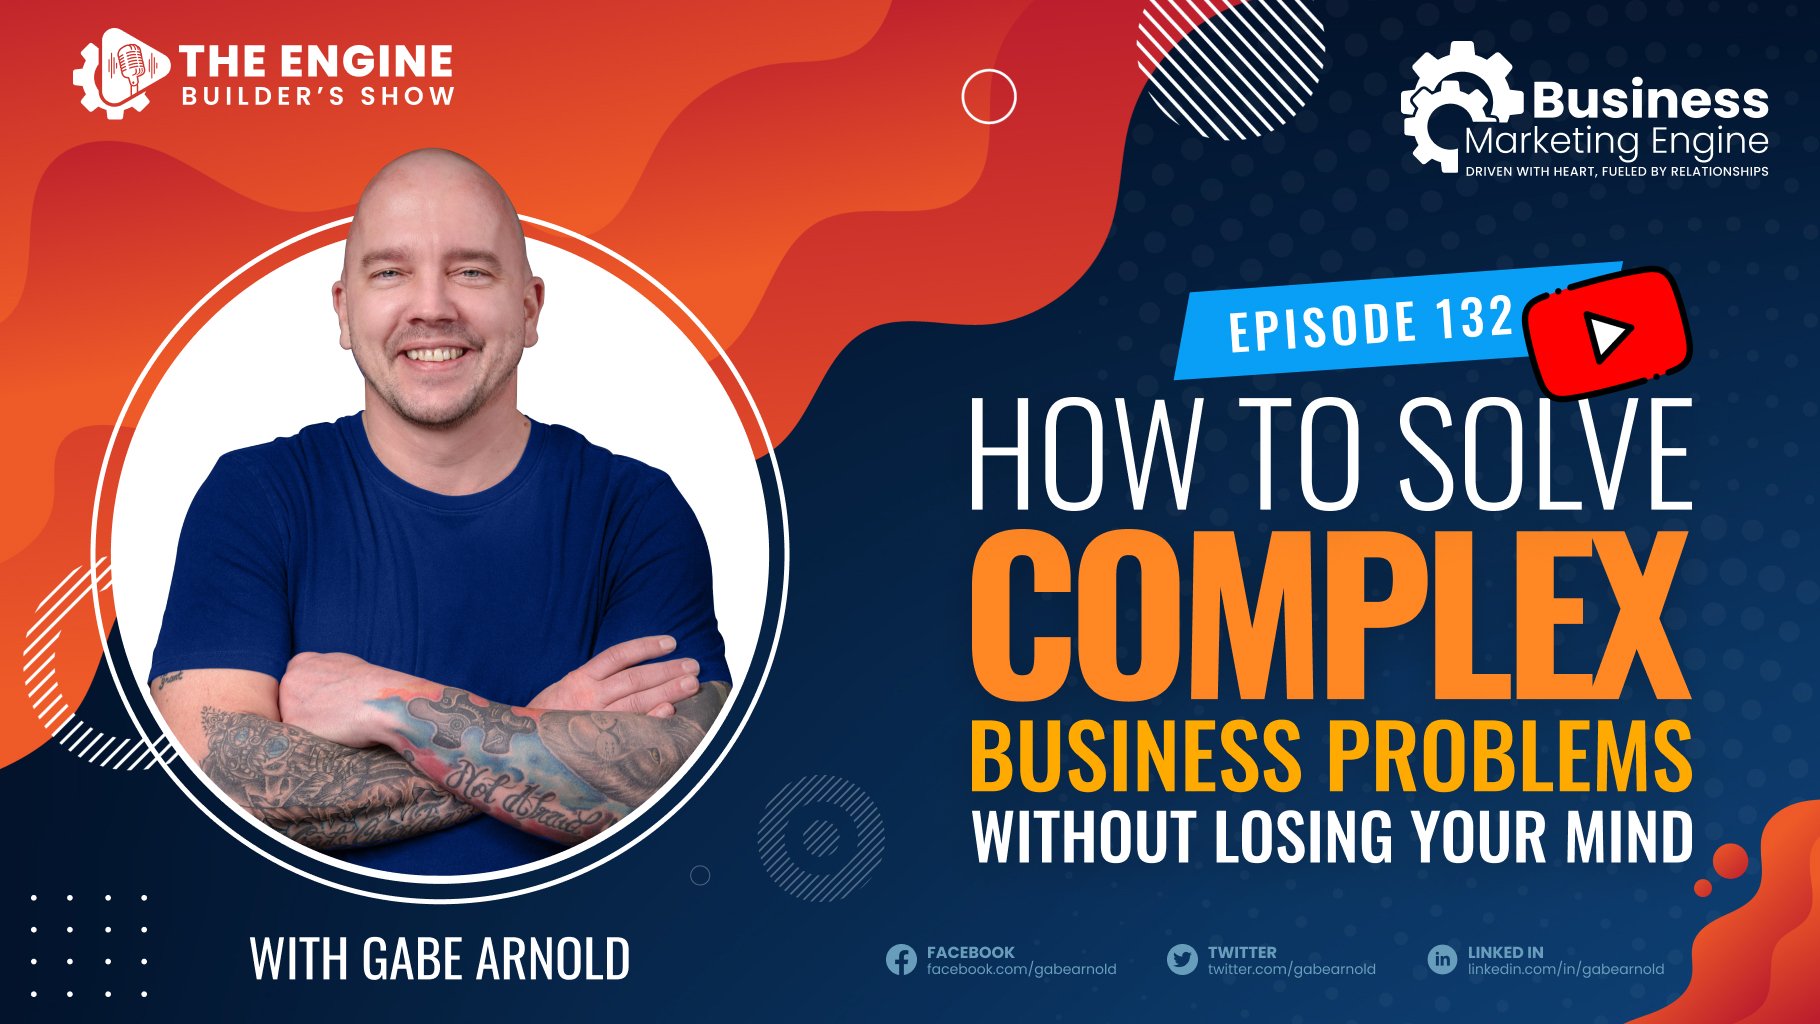 business problems, How to Solve Complex Business Problems Without Losing Your Mind &#8211; (Episode 132), Business Marketing Engine